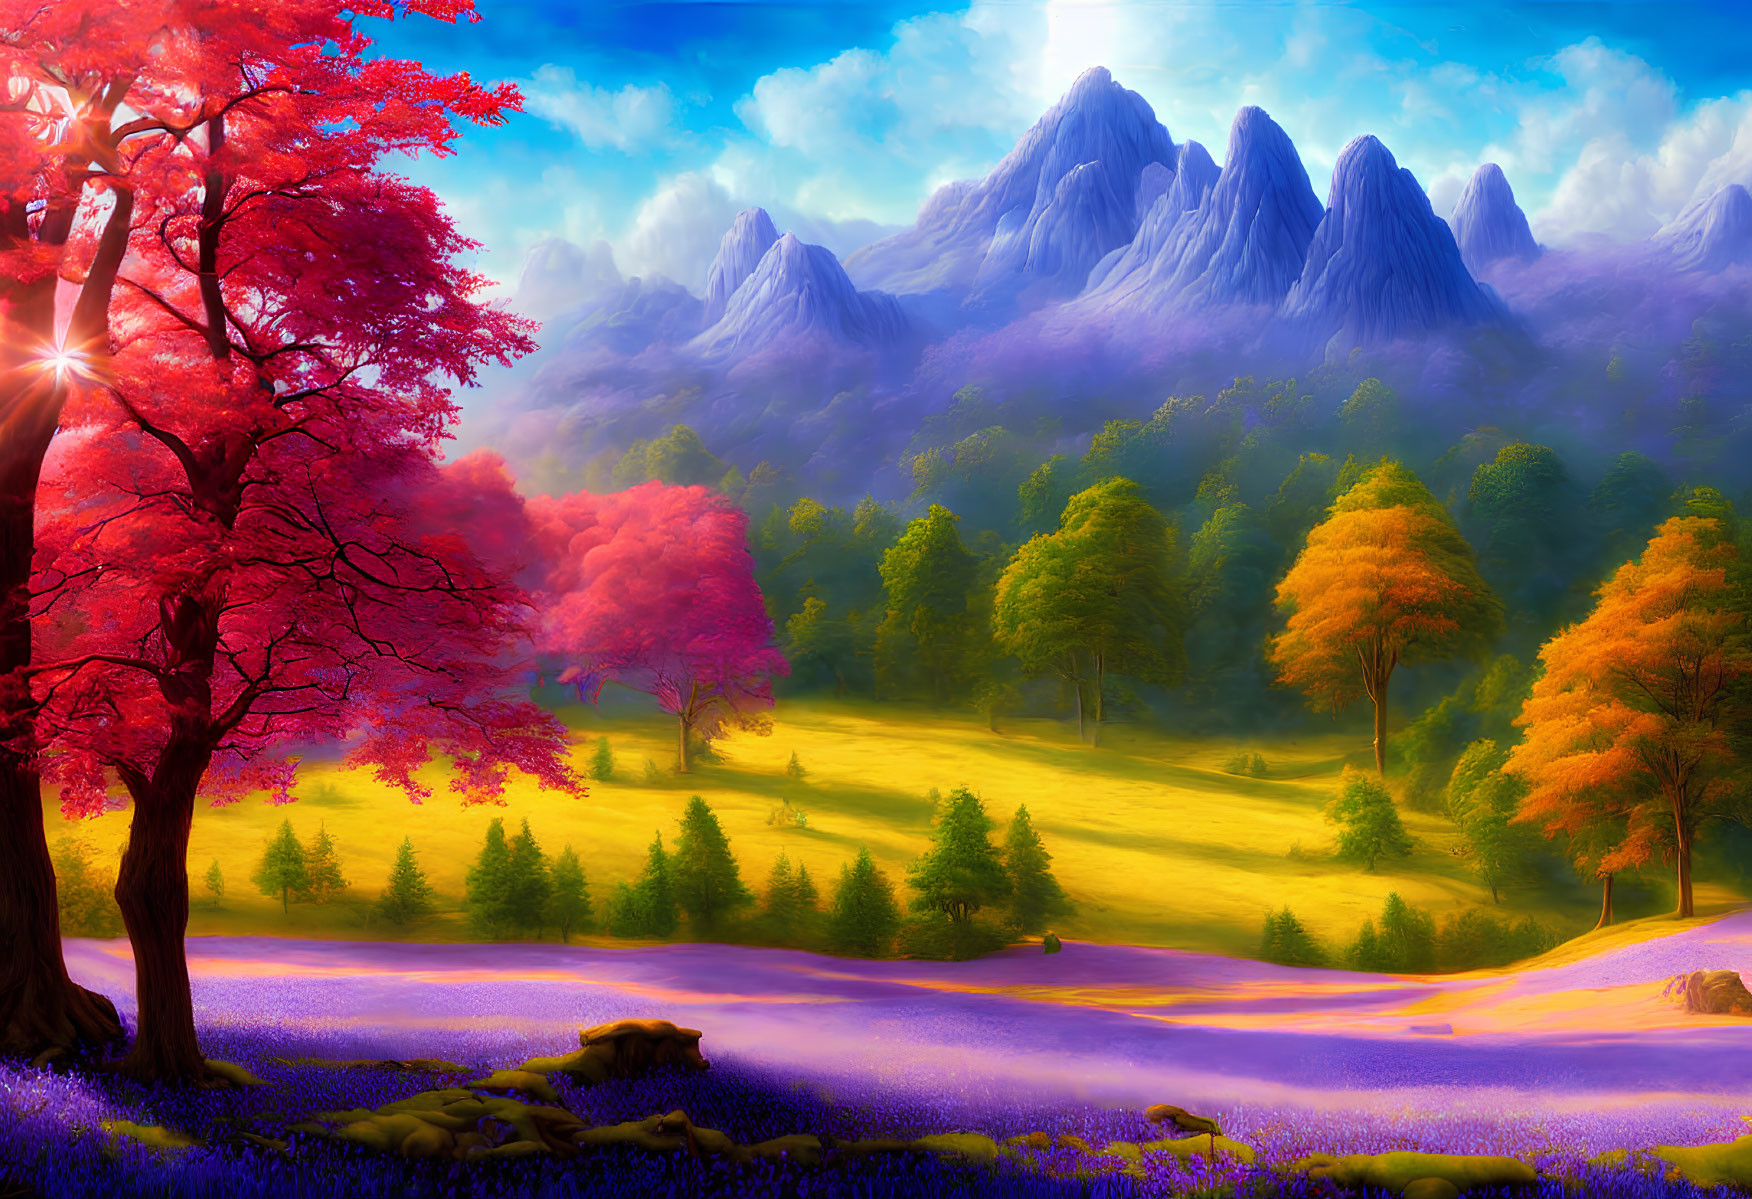 Colorful Fantasy Landscape with Trees, River, Flowers, Sunbeams, and Mountains